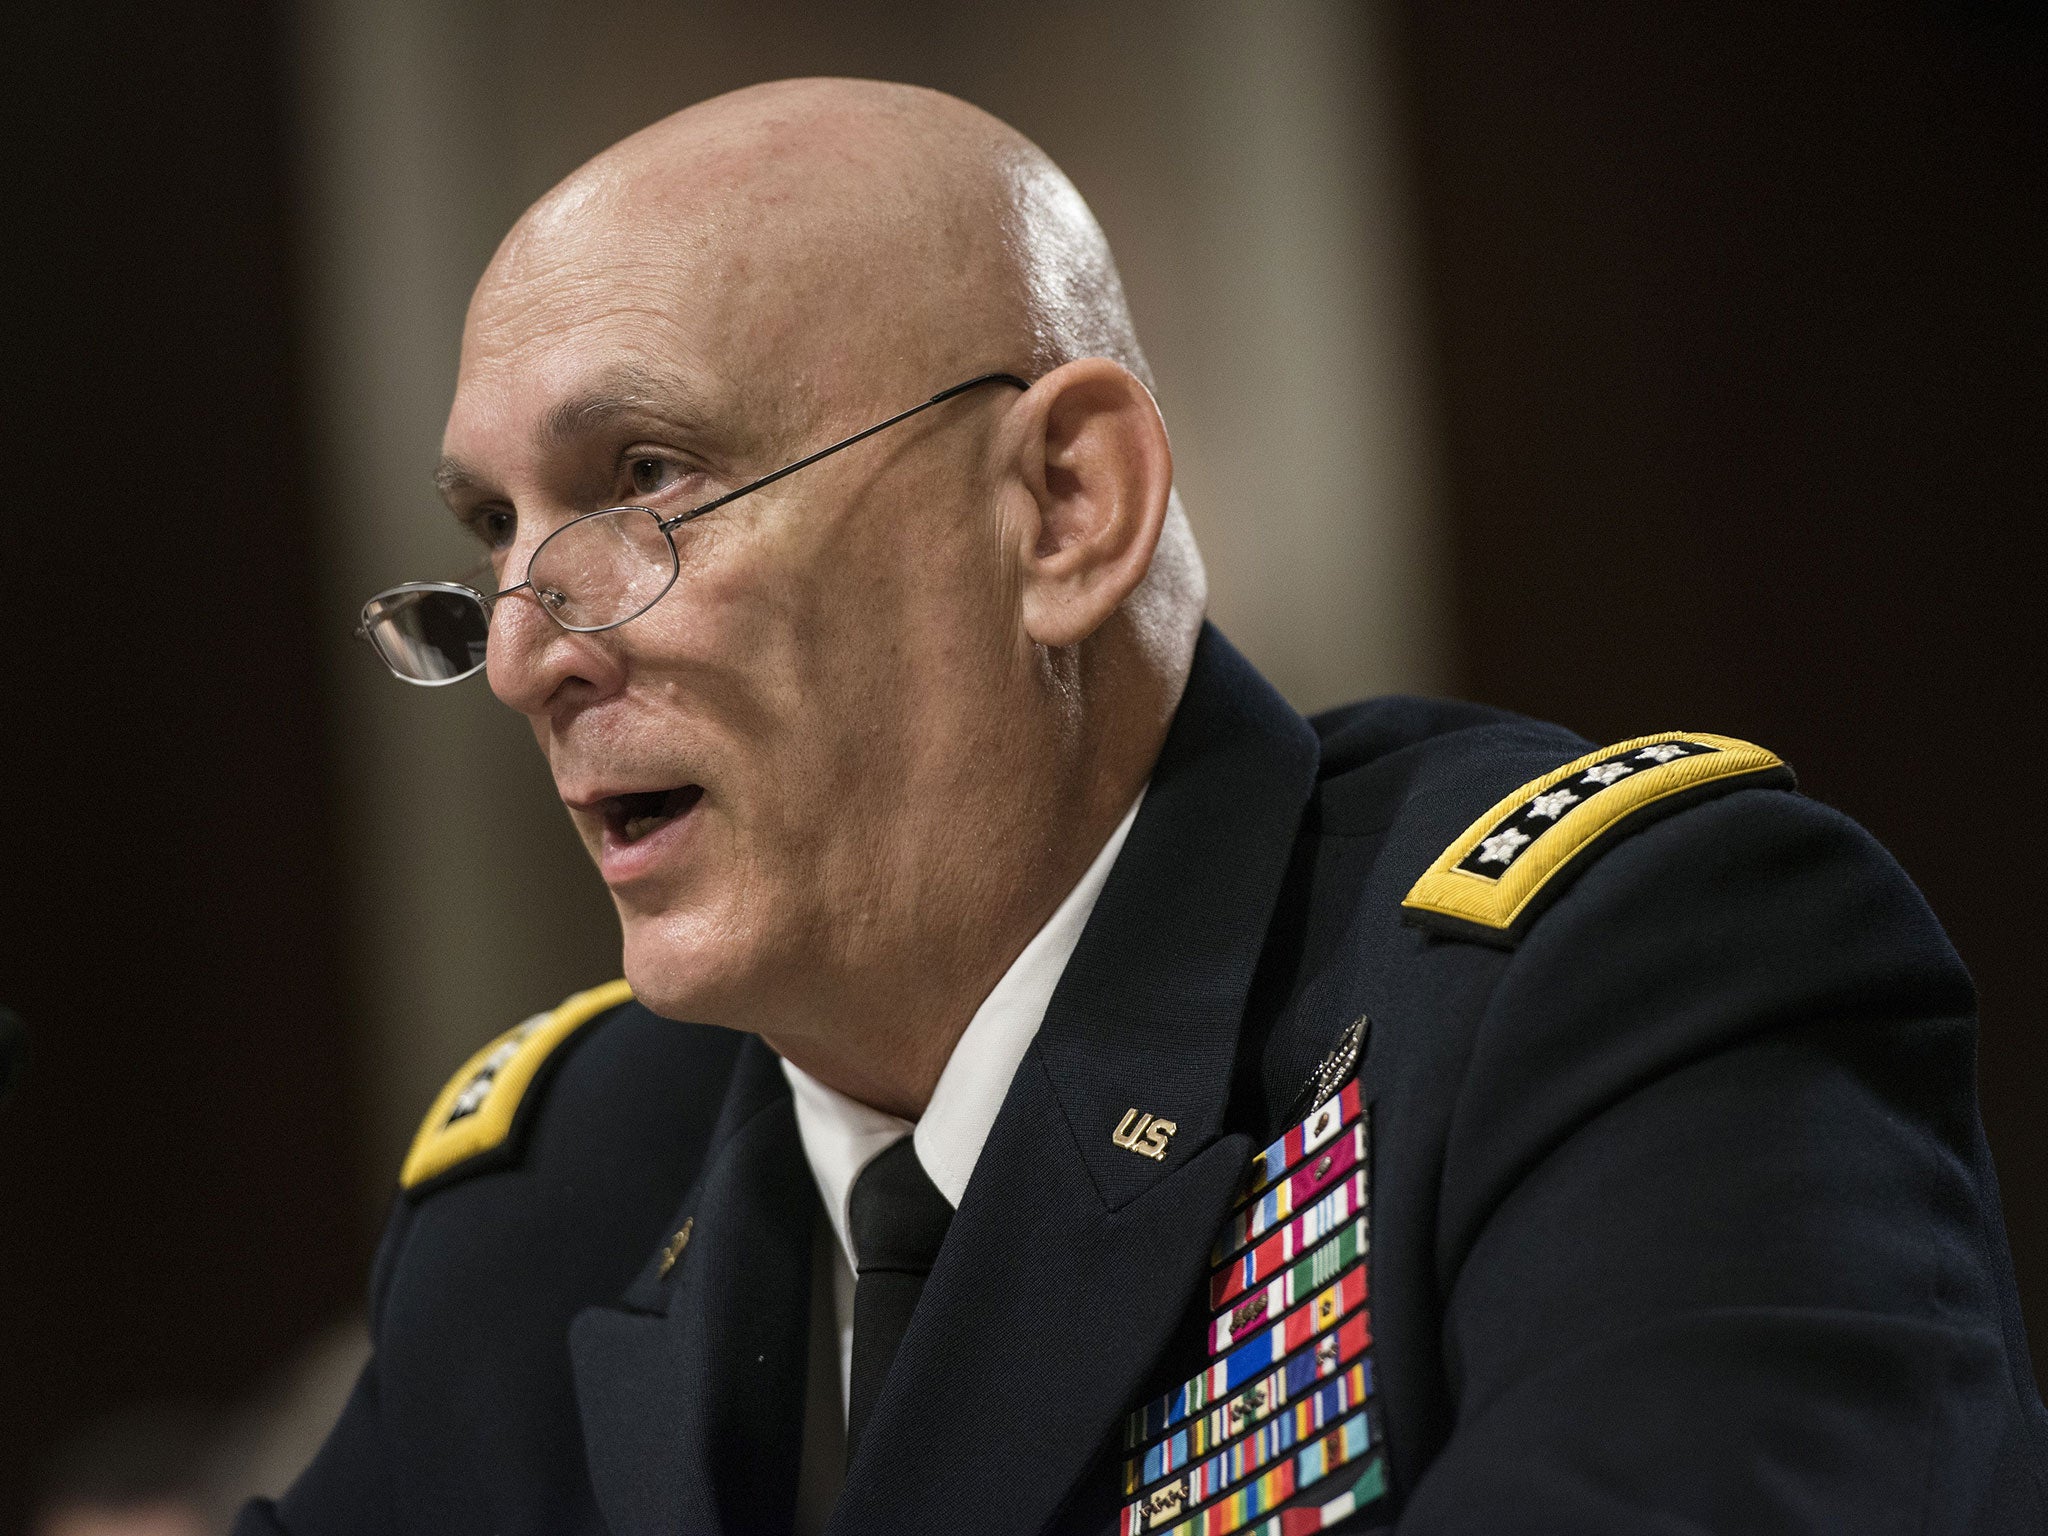 General Raymond Odierno, the Chief of Staff of the US army, told The Daily Telegraph that the West was facing 'the most uncertain global environment I have seen in 40 years of service'